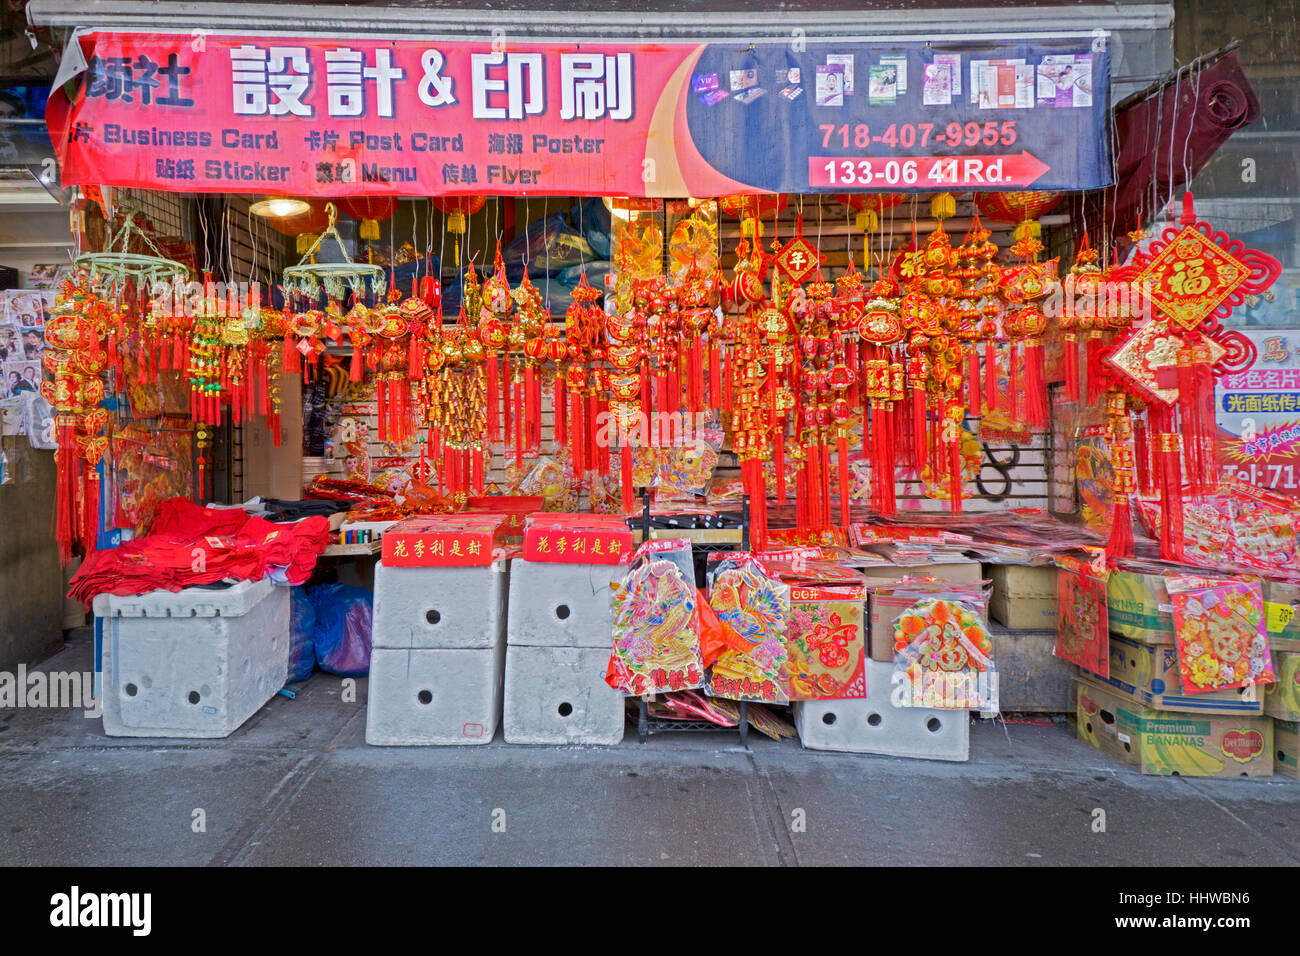 A stand in Chinatown Flushing, Queens, New York that sells good luck